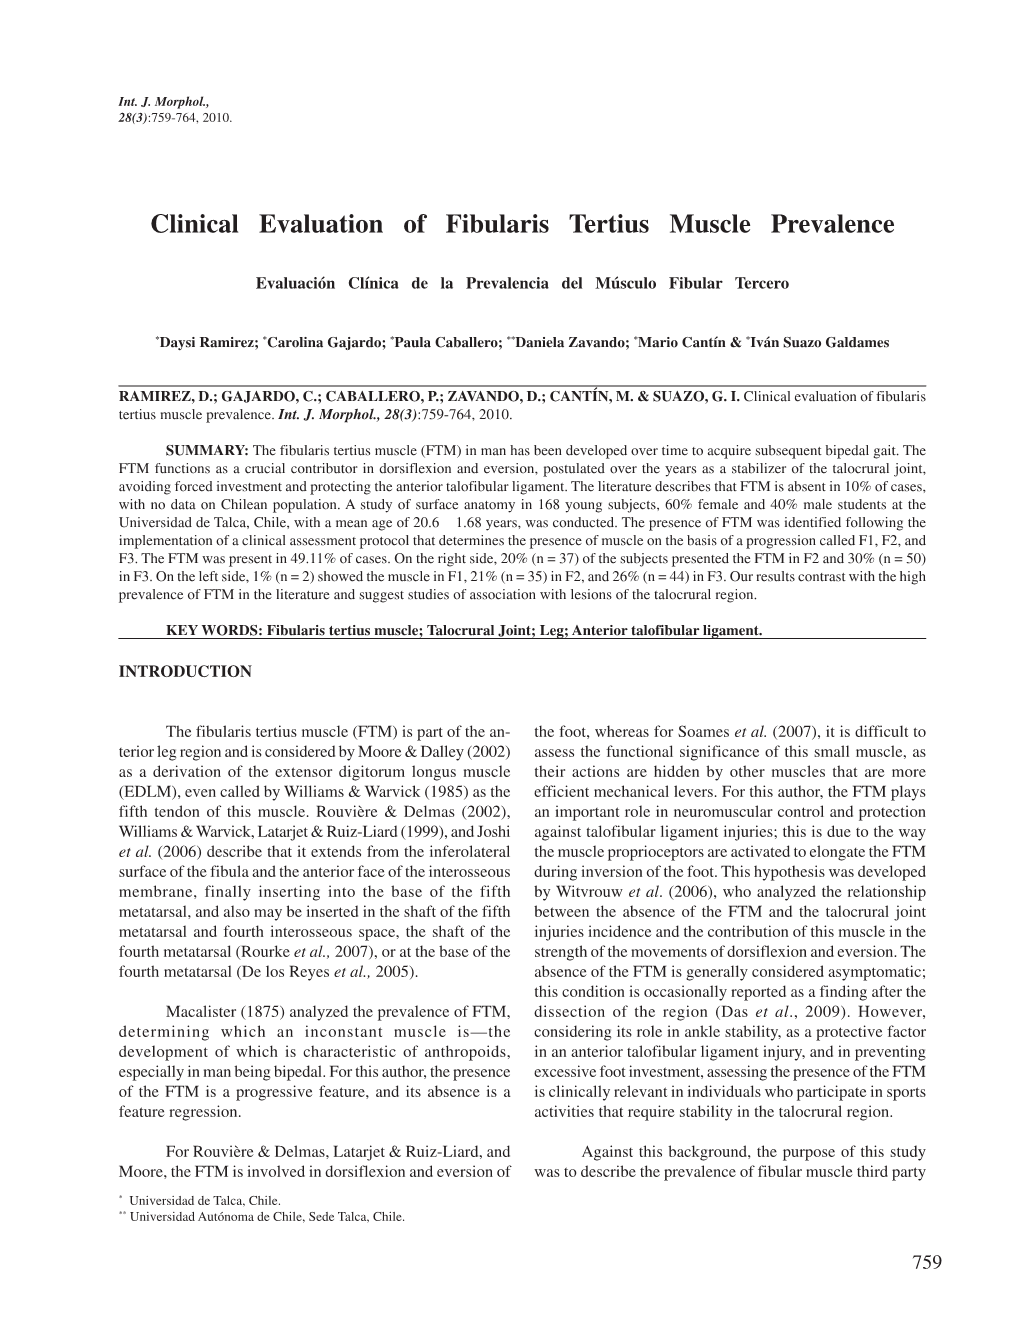 Clinical Evaluation of Fibularis Tertius Muscle Prevalence